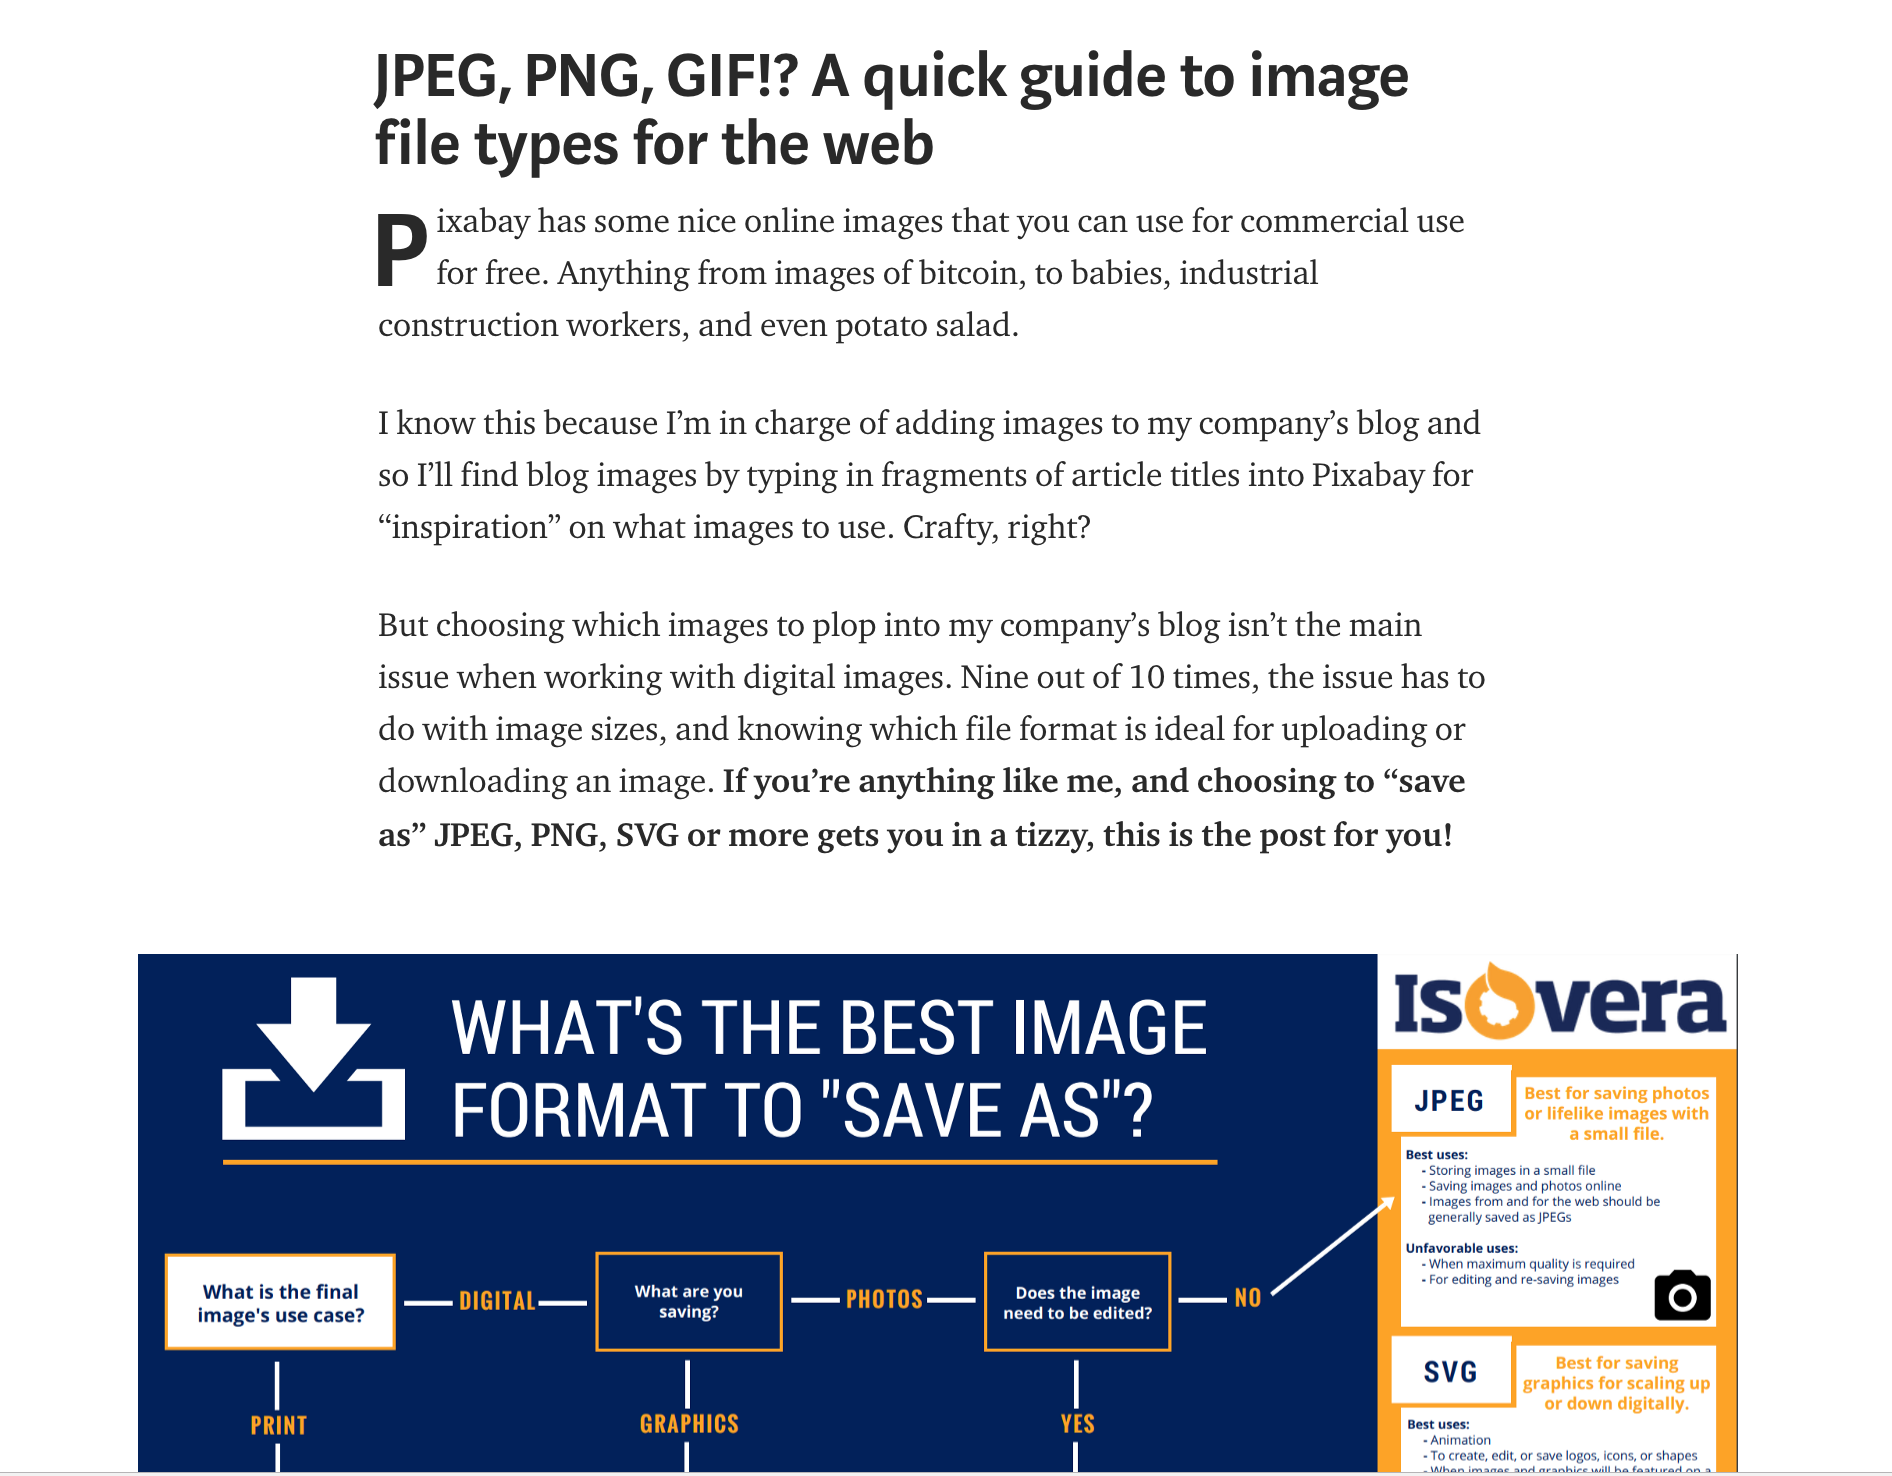 Jpeg Png Gif A Quick Guide To Image File Types For The Web Infographic By Isovera Staff Isovera Medium